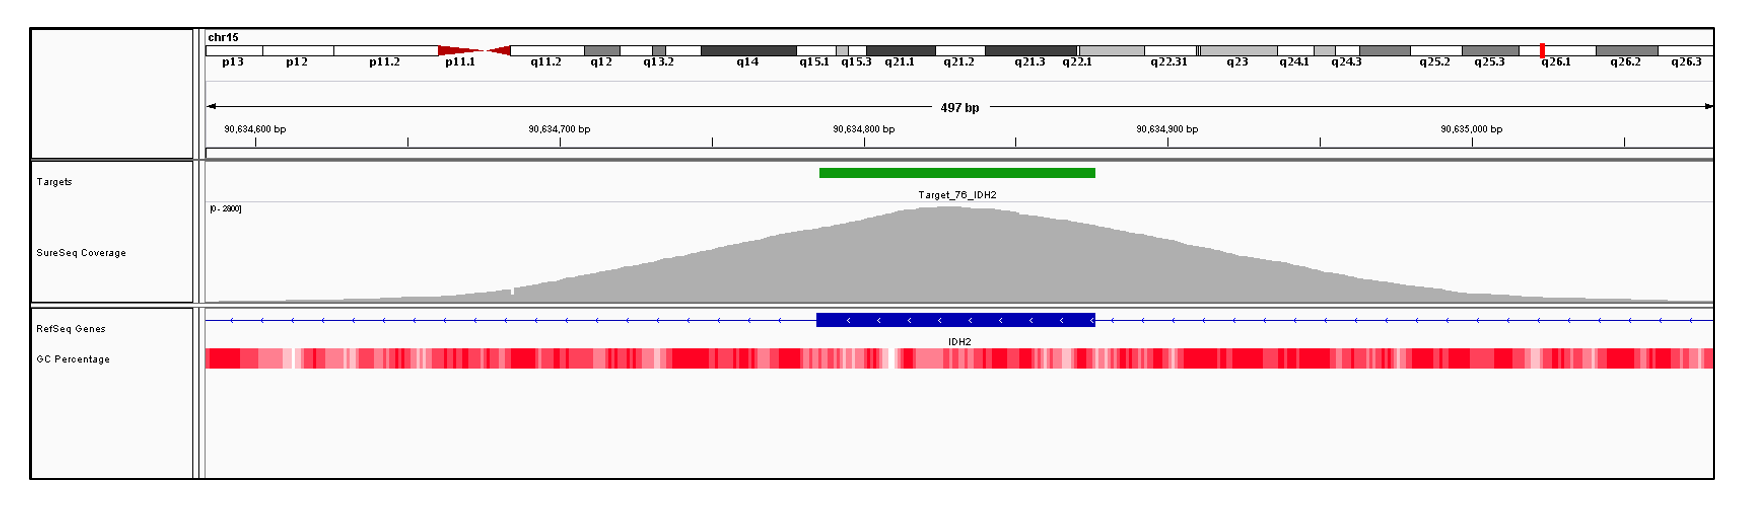 IDH2 Exon 2 (hg19 chr15:90634785-90634876). Depth of coverage per base (grey). Targeted region (green). Gene coding region as defined by RefSeq (blue). GC percentage (red). Image